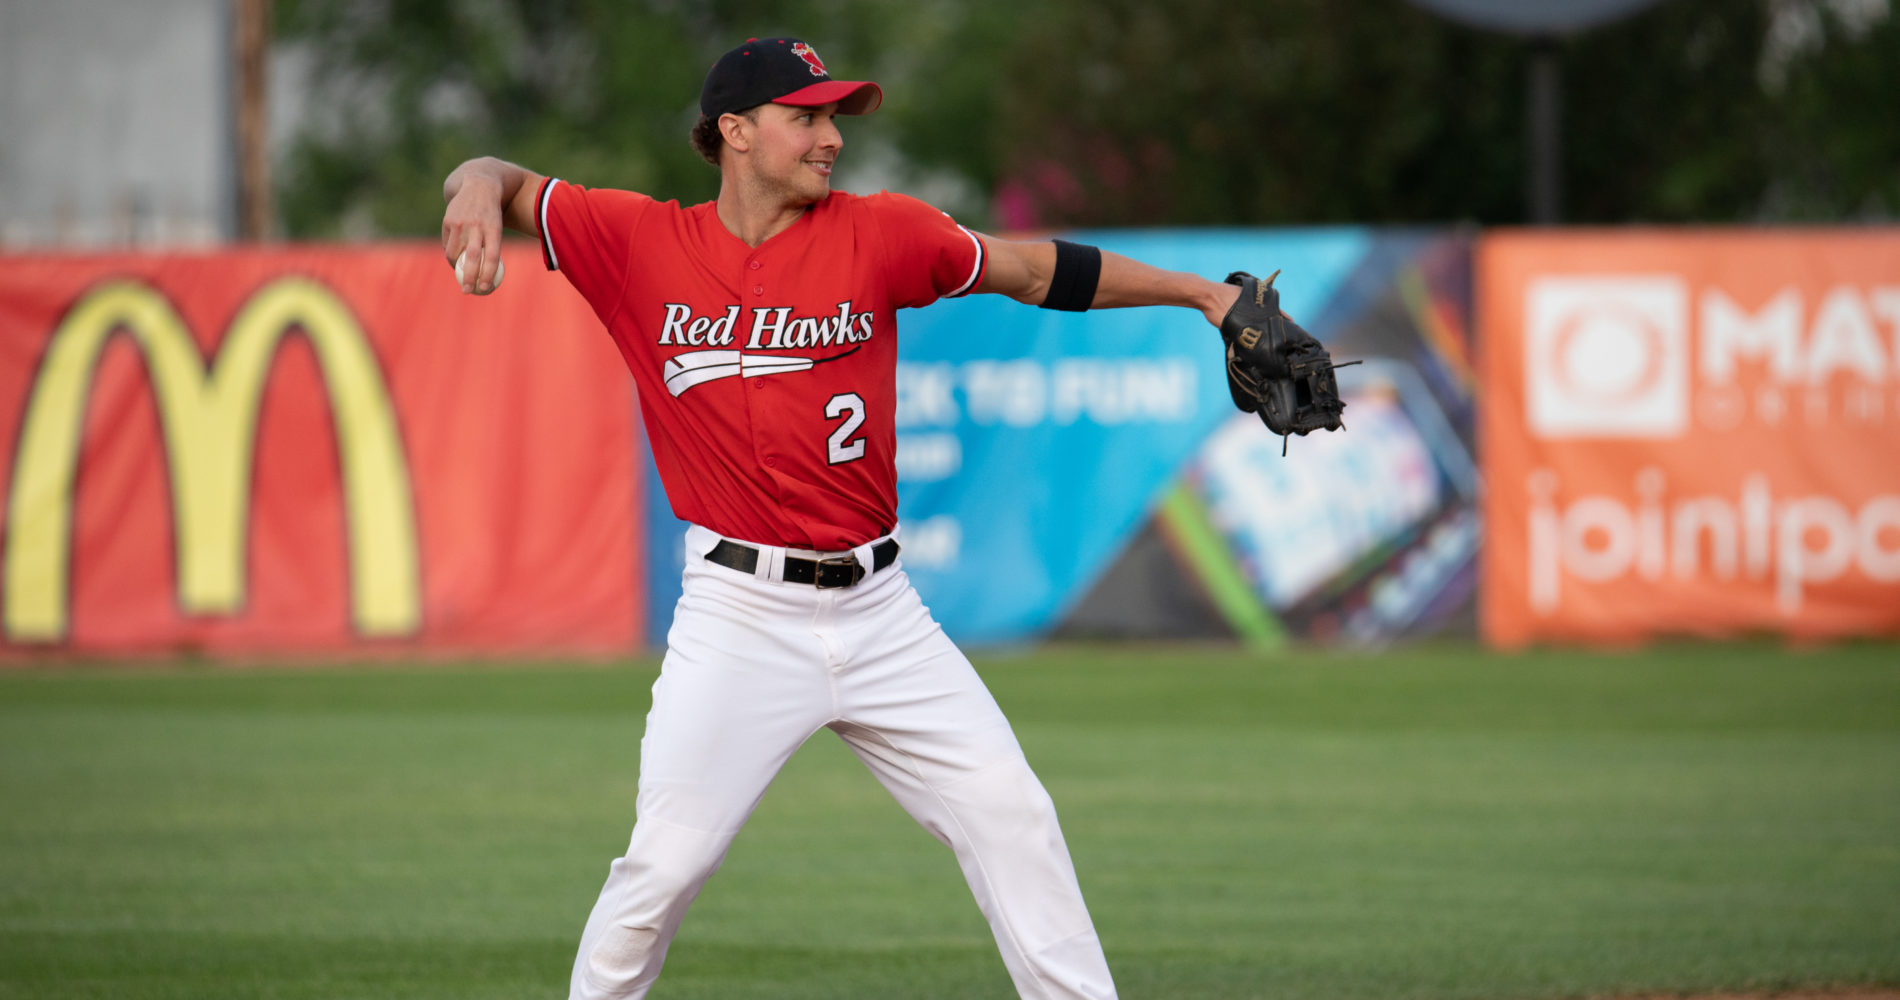 Fan Favorite Dexter Returns for Third Season with the RedHawks